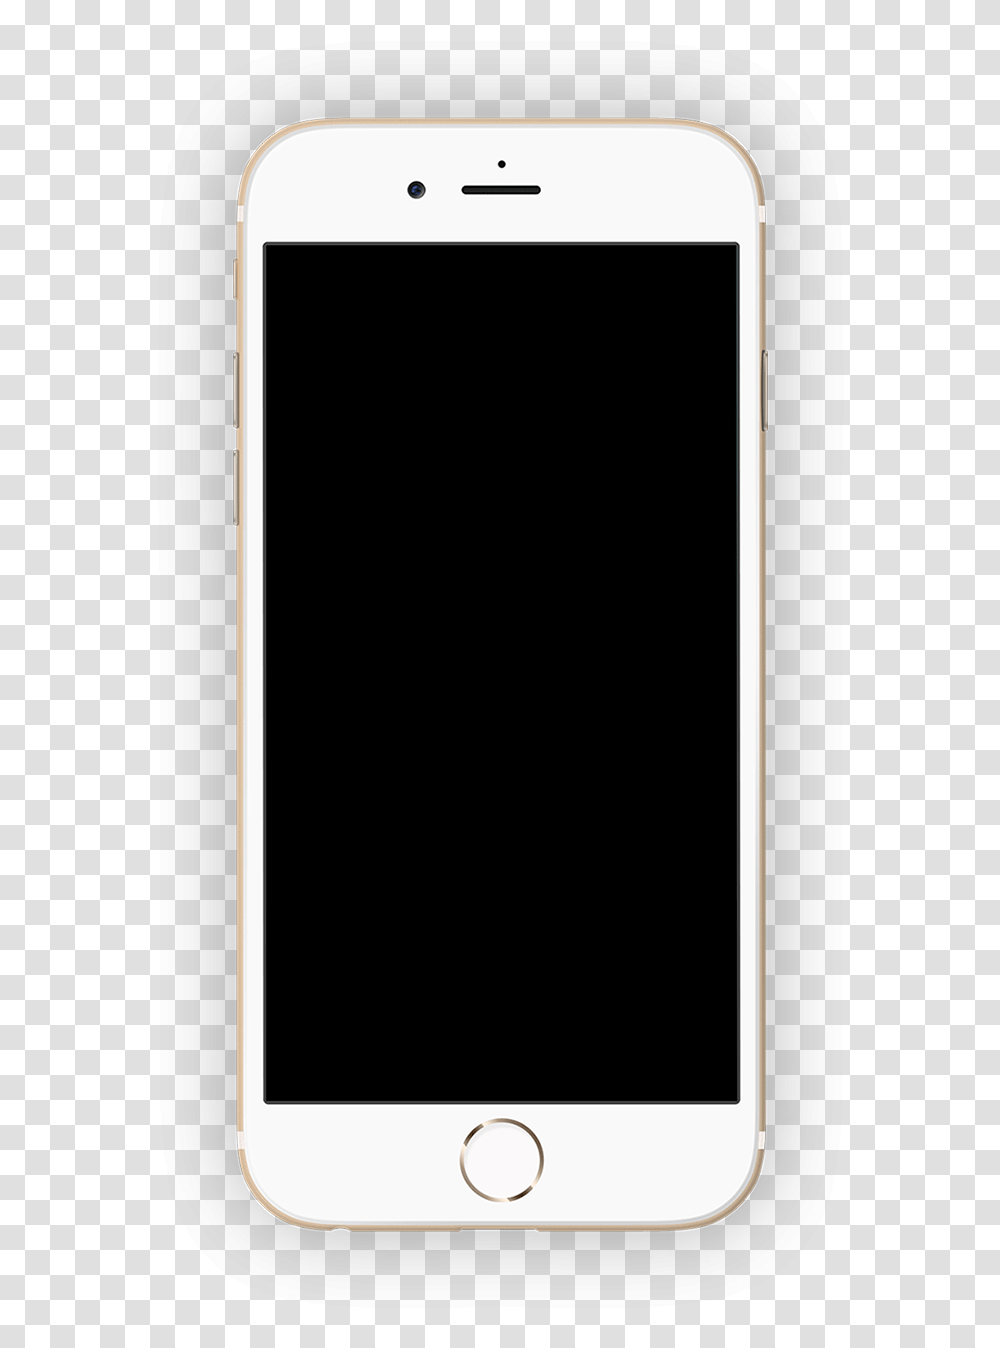 Iphone Mobile Screen Clipart Mobile Screen Iphone, Mobile Phone, Electronics, Stick, Plaque Transparent Png